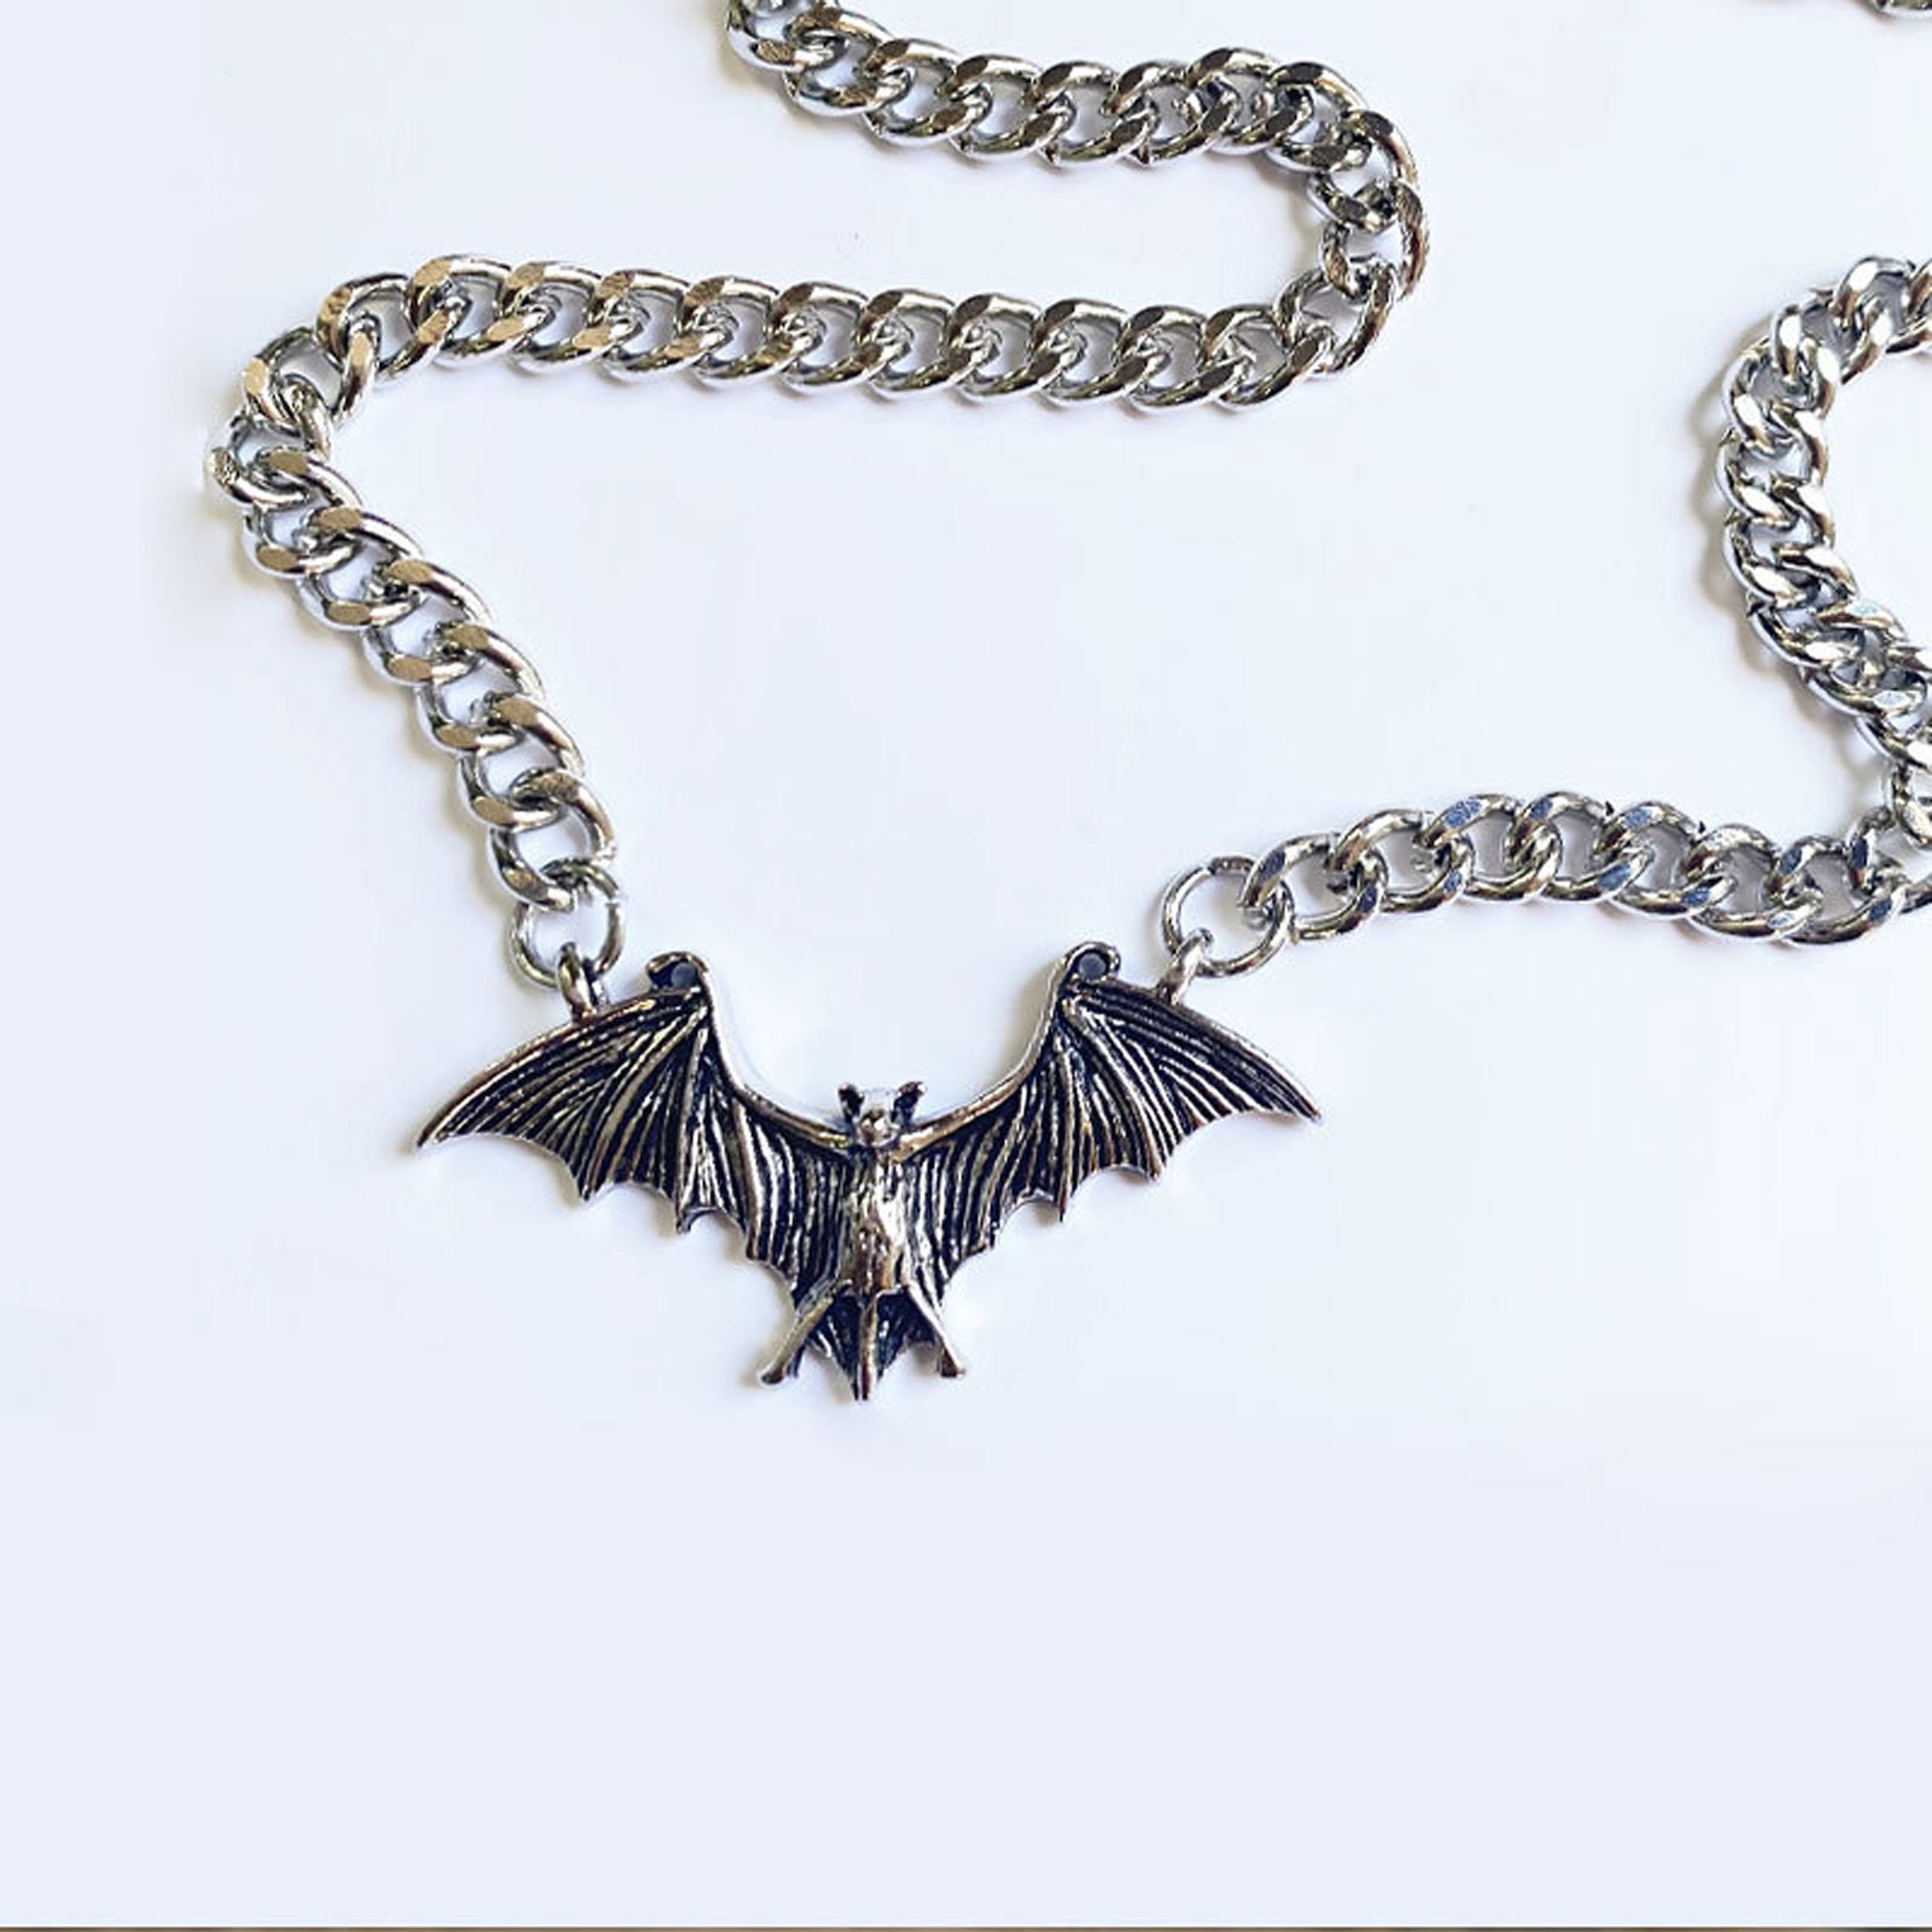 Gothic choker with bat and chains